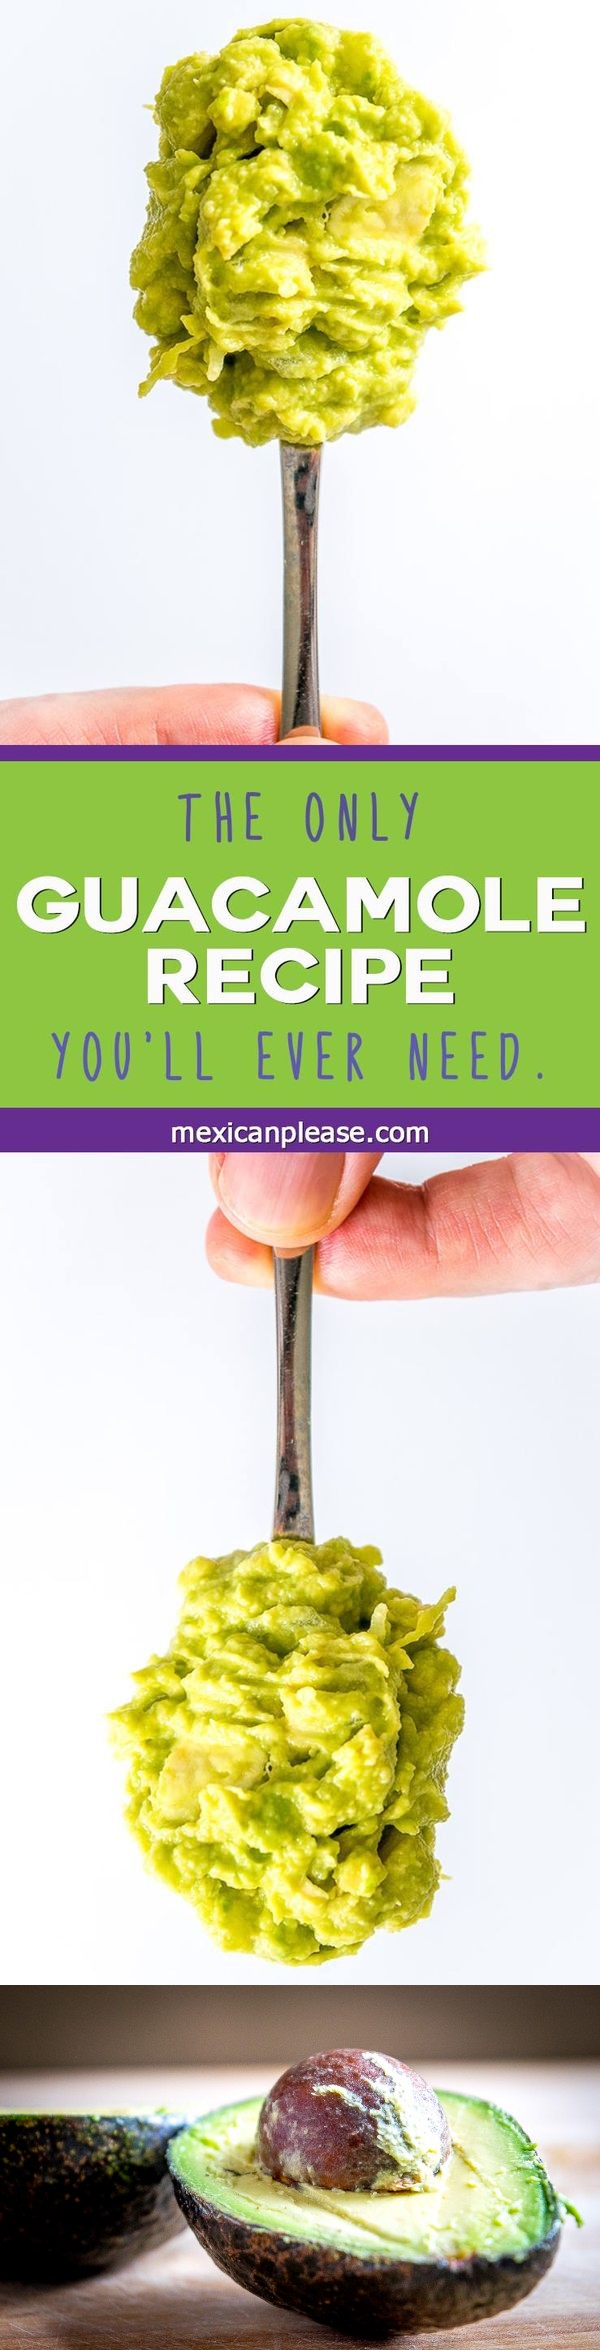 The Only Guacamole Recipe You'll Ever Need